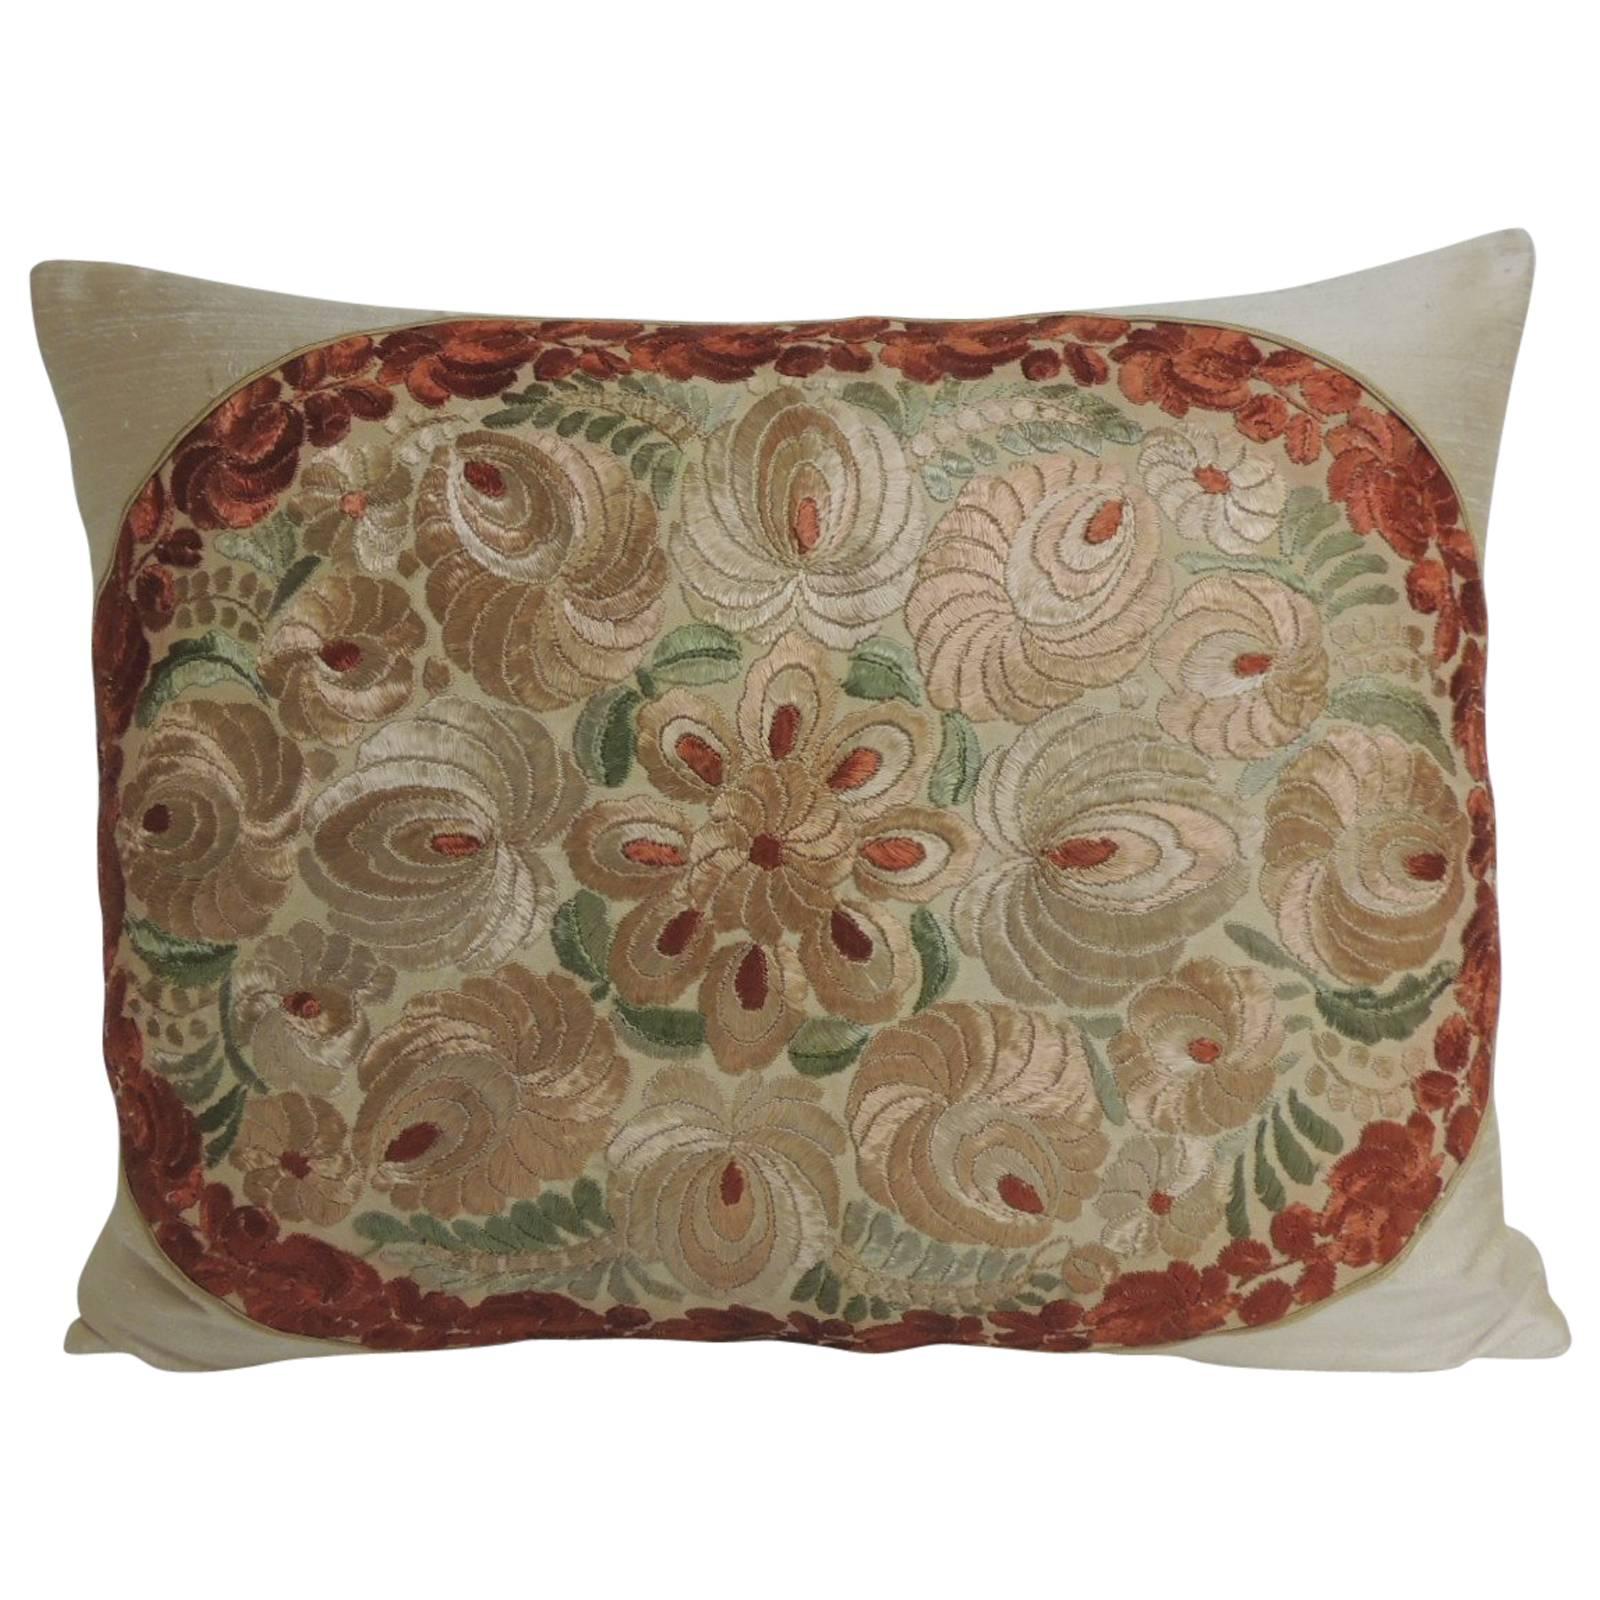 19th Century Orange and Red Silk Embroidery Floral Bolster Decorative Pillow